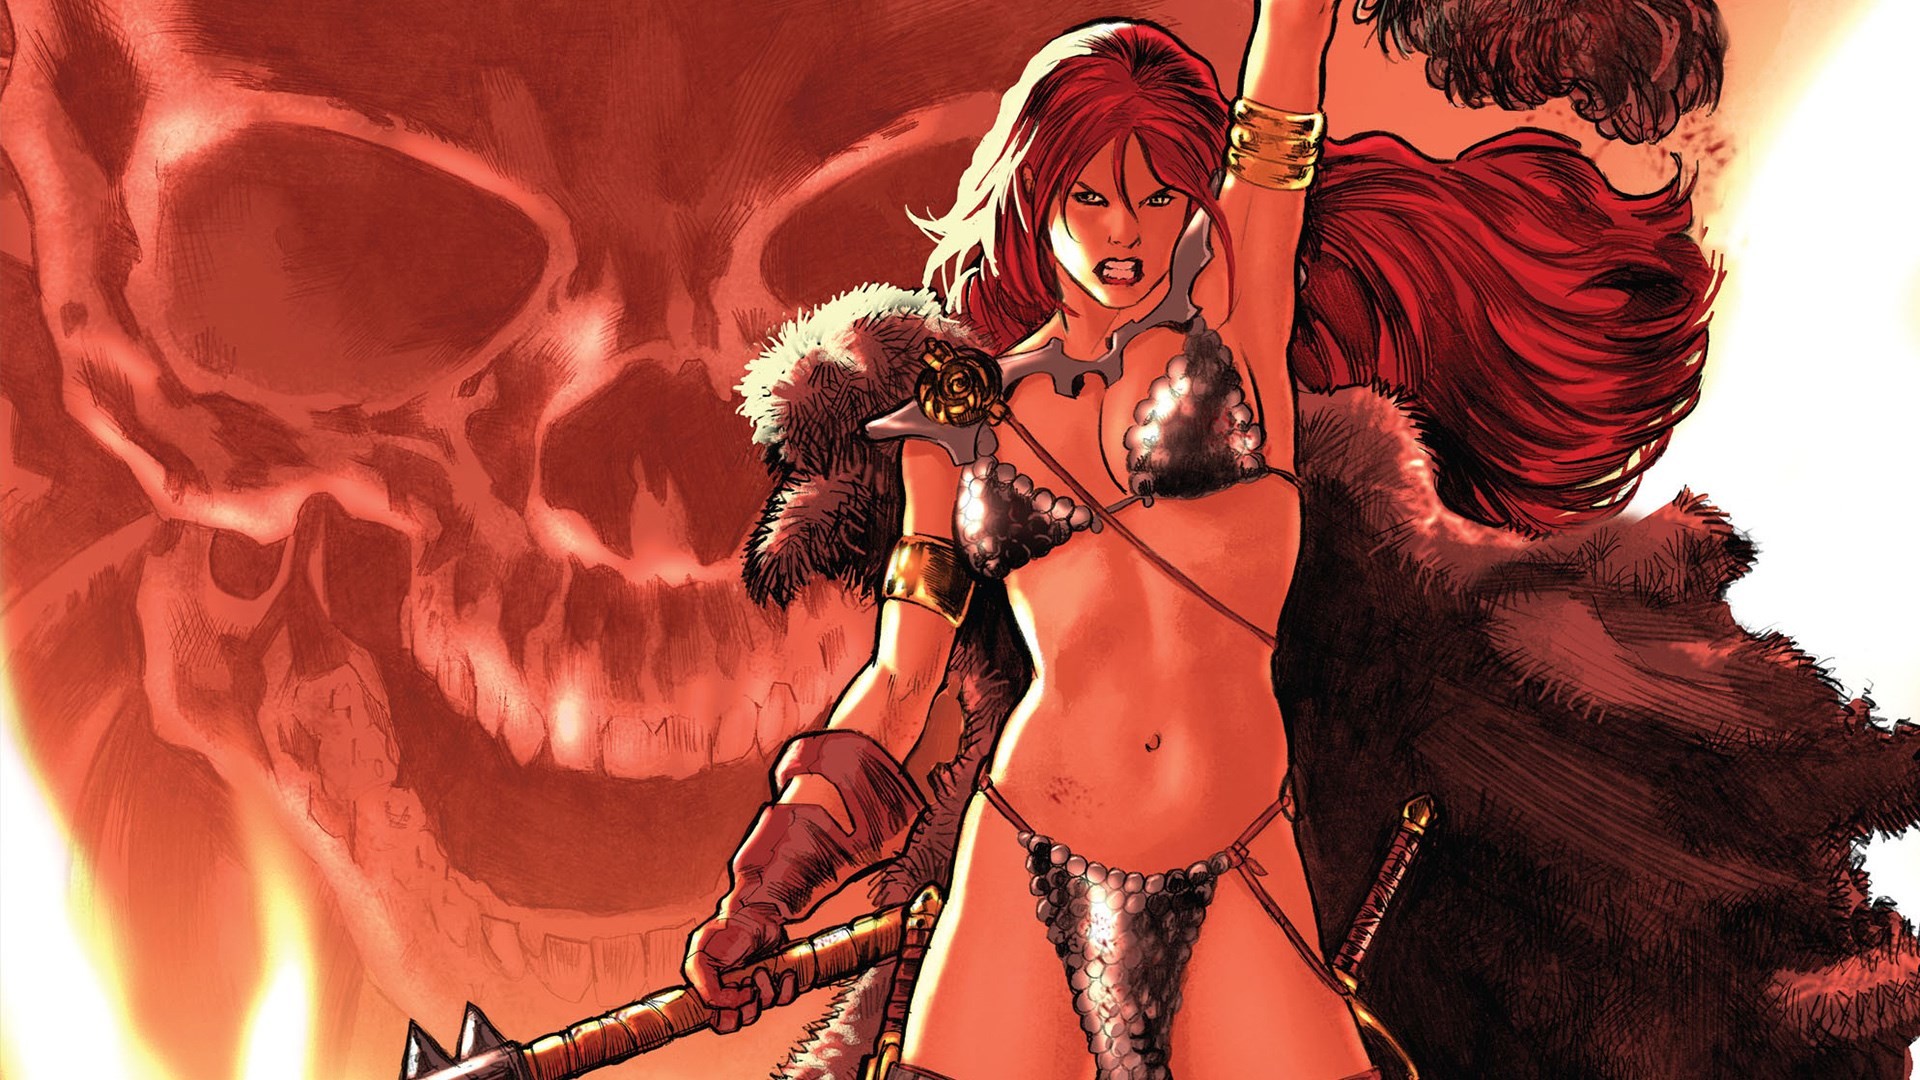 1920x1080 red sonja wallpaper: Wallpapers Collection, 497 kB - Eideard Nail